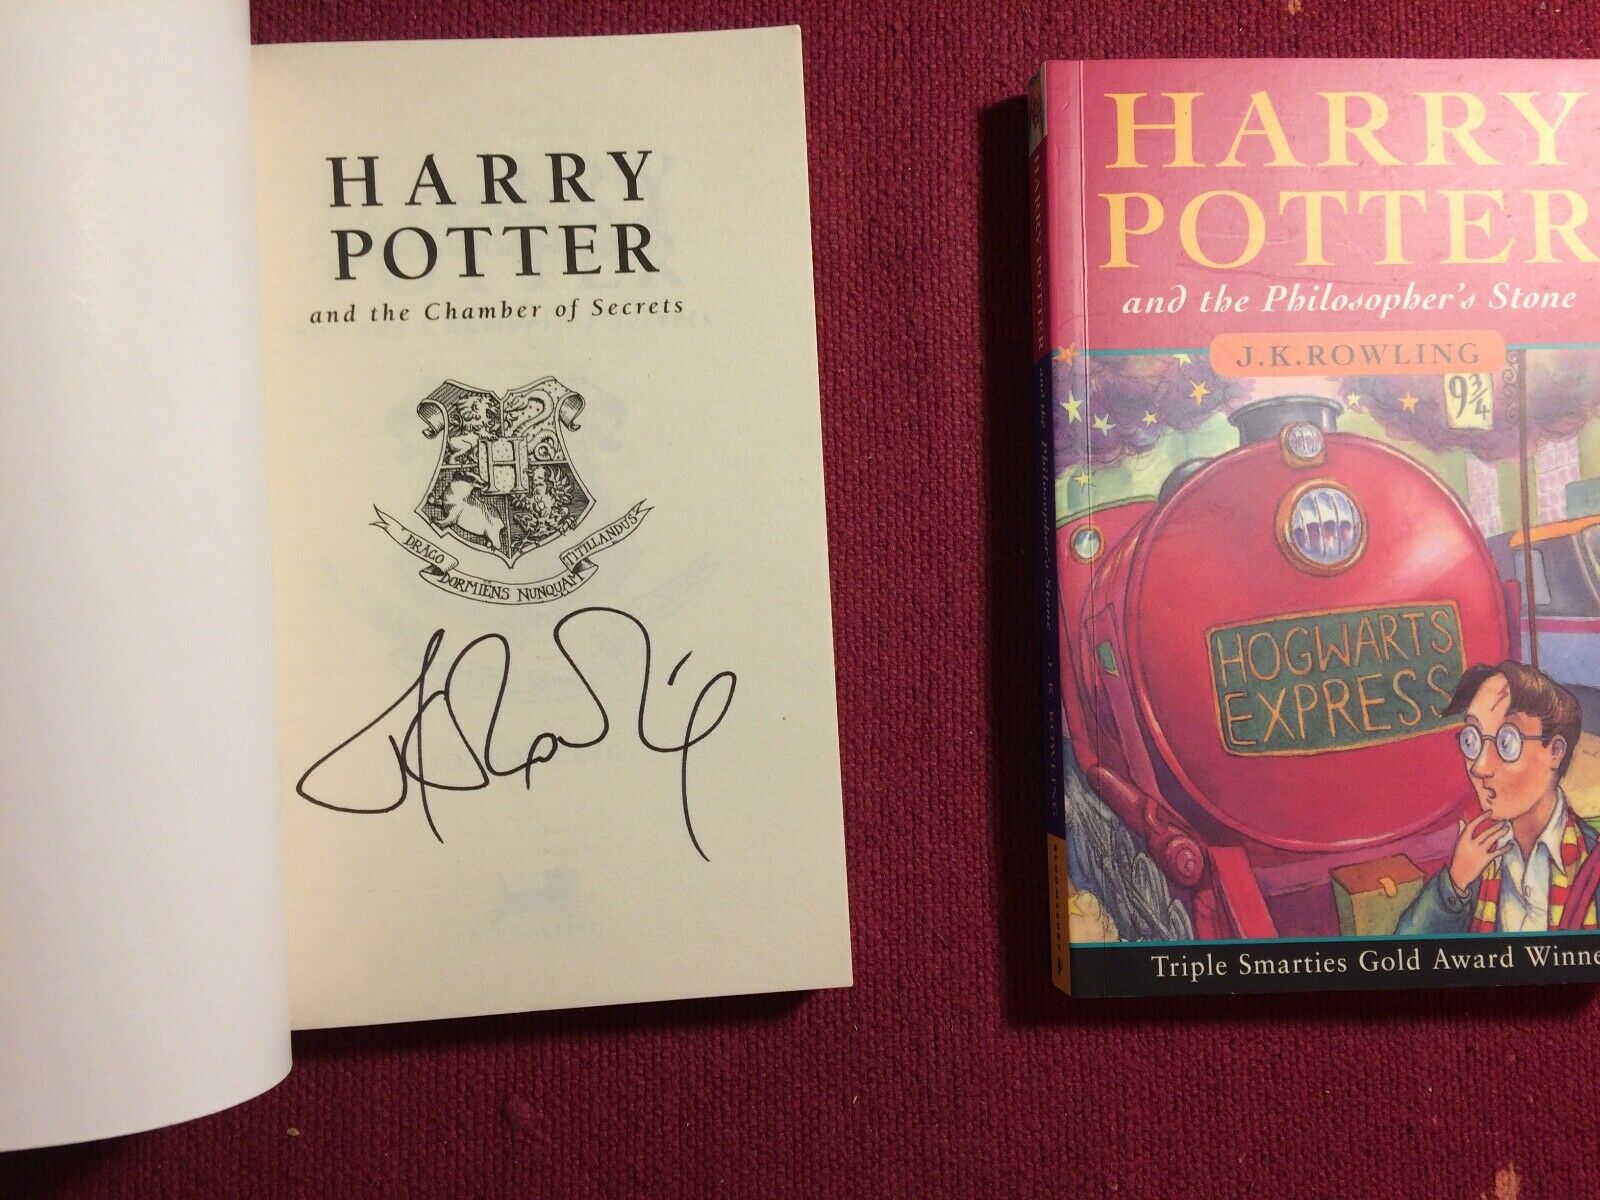 J.K. Rowling signature forgery found inside a Harry Potter and the Chamber of Secrets. Sold in a set with a forged Philosopher's Stone. Sold by MColes78 on Ebay.